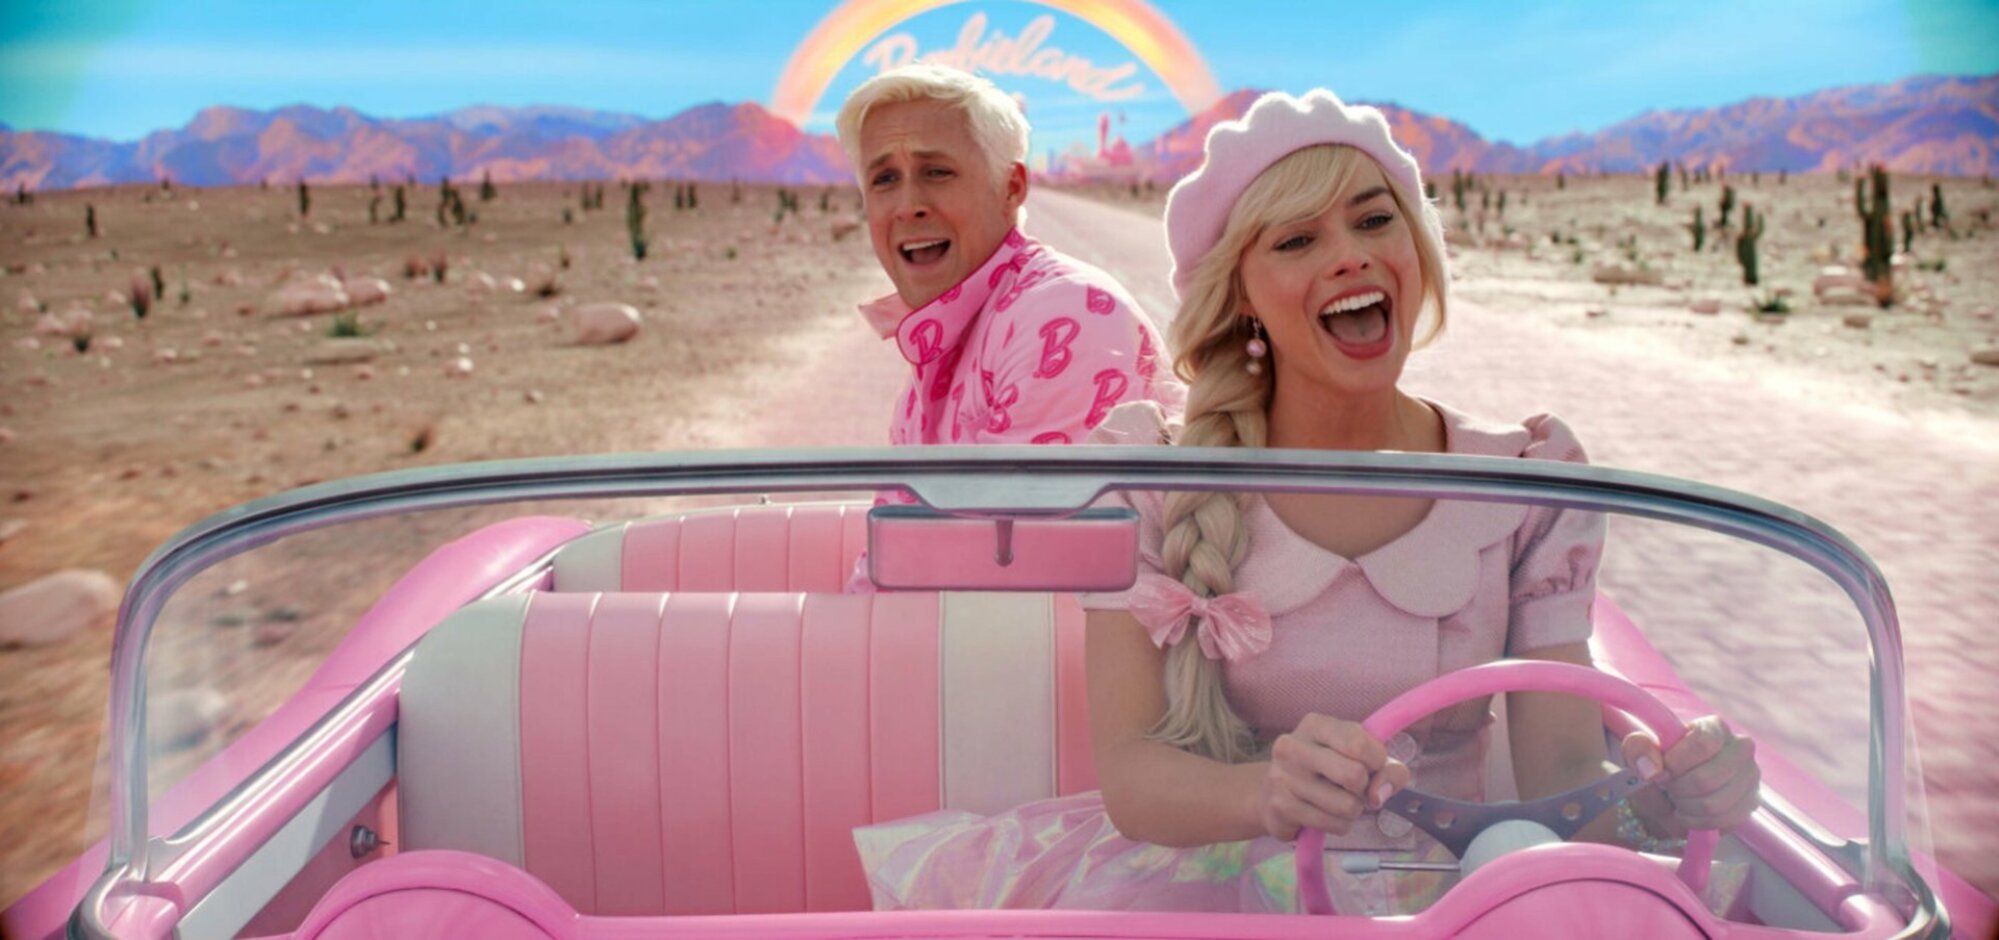 Barbie drives a car, singing, with Ken riding in the back.